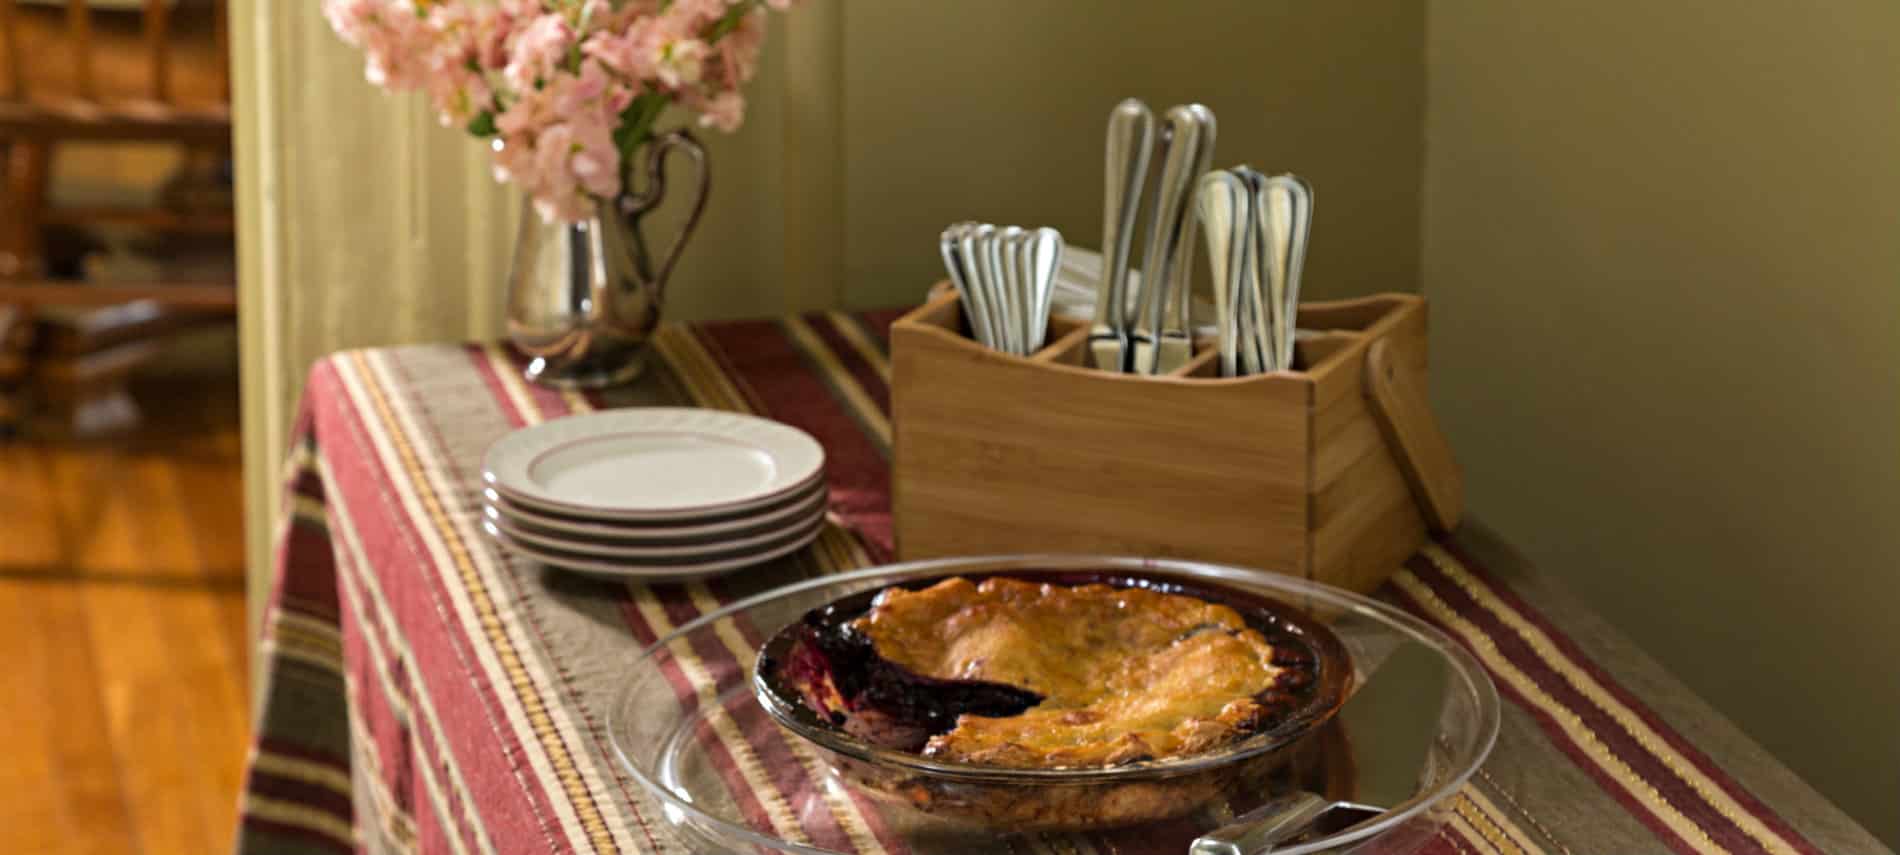 A table with a striped cloth holds a pie along with white plates and cutlery. .